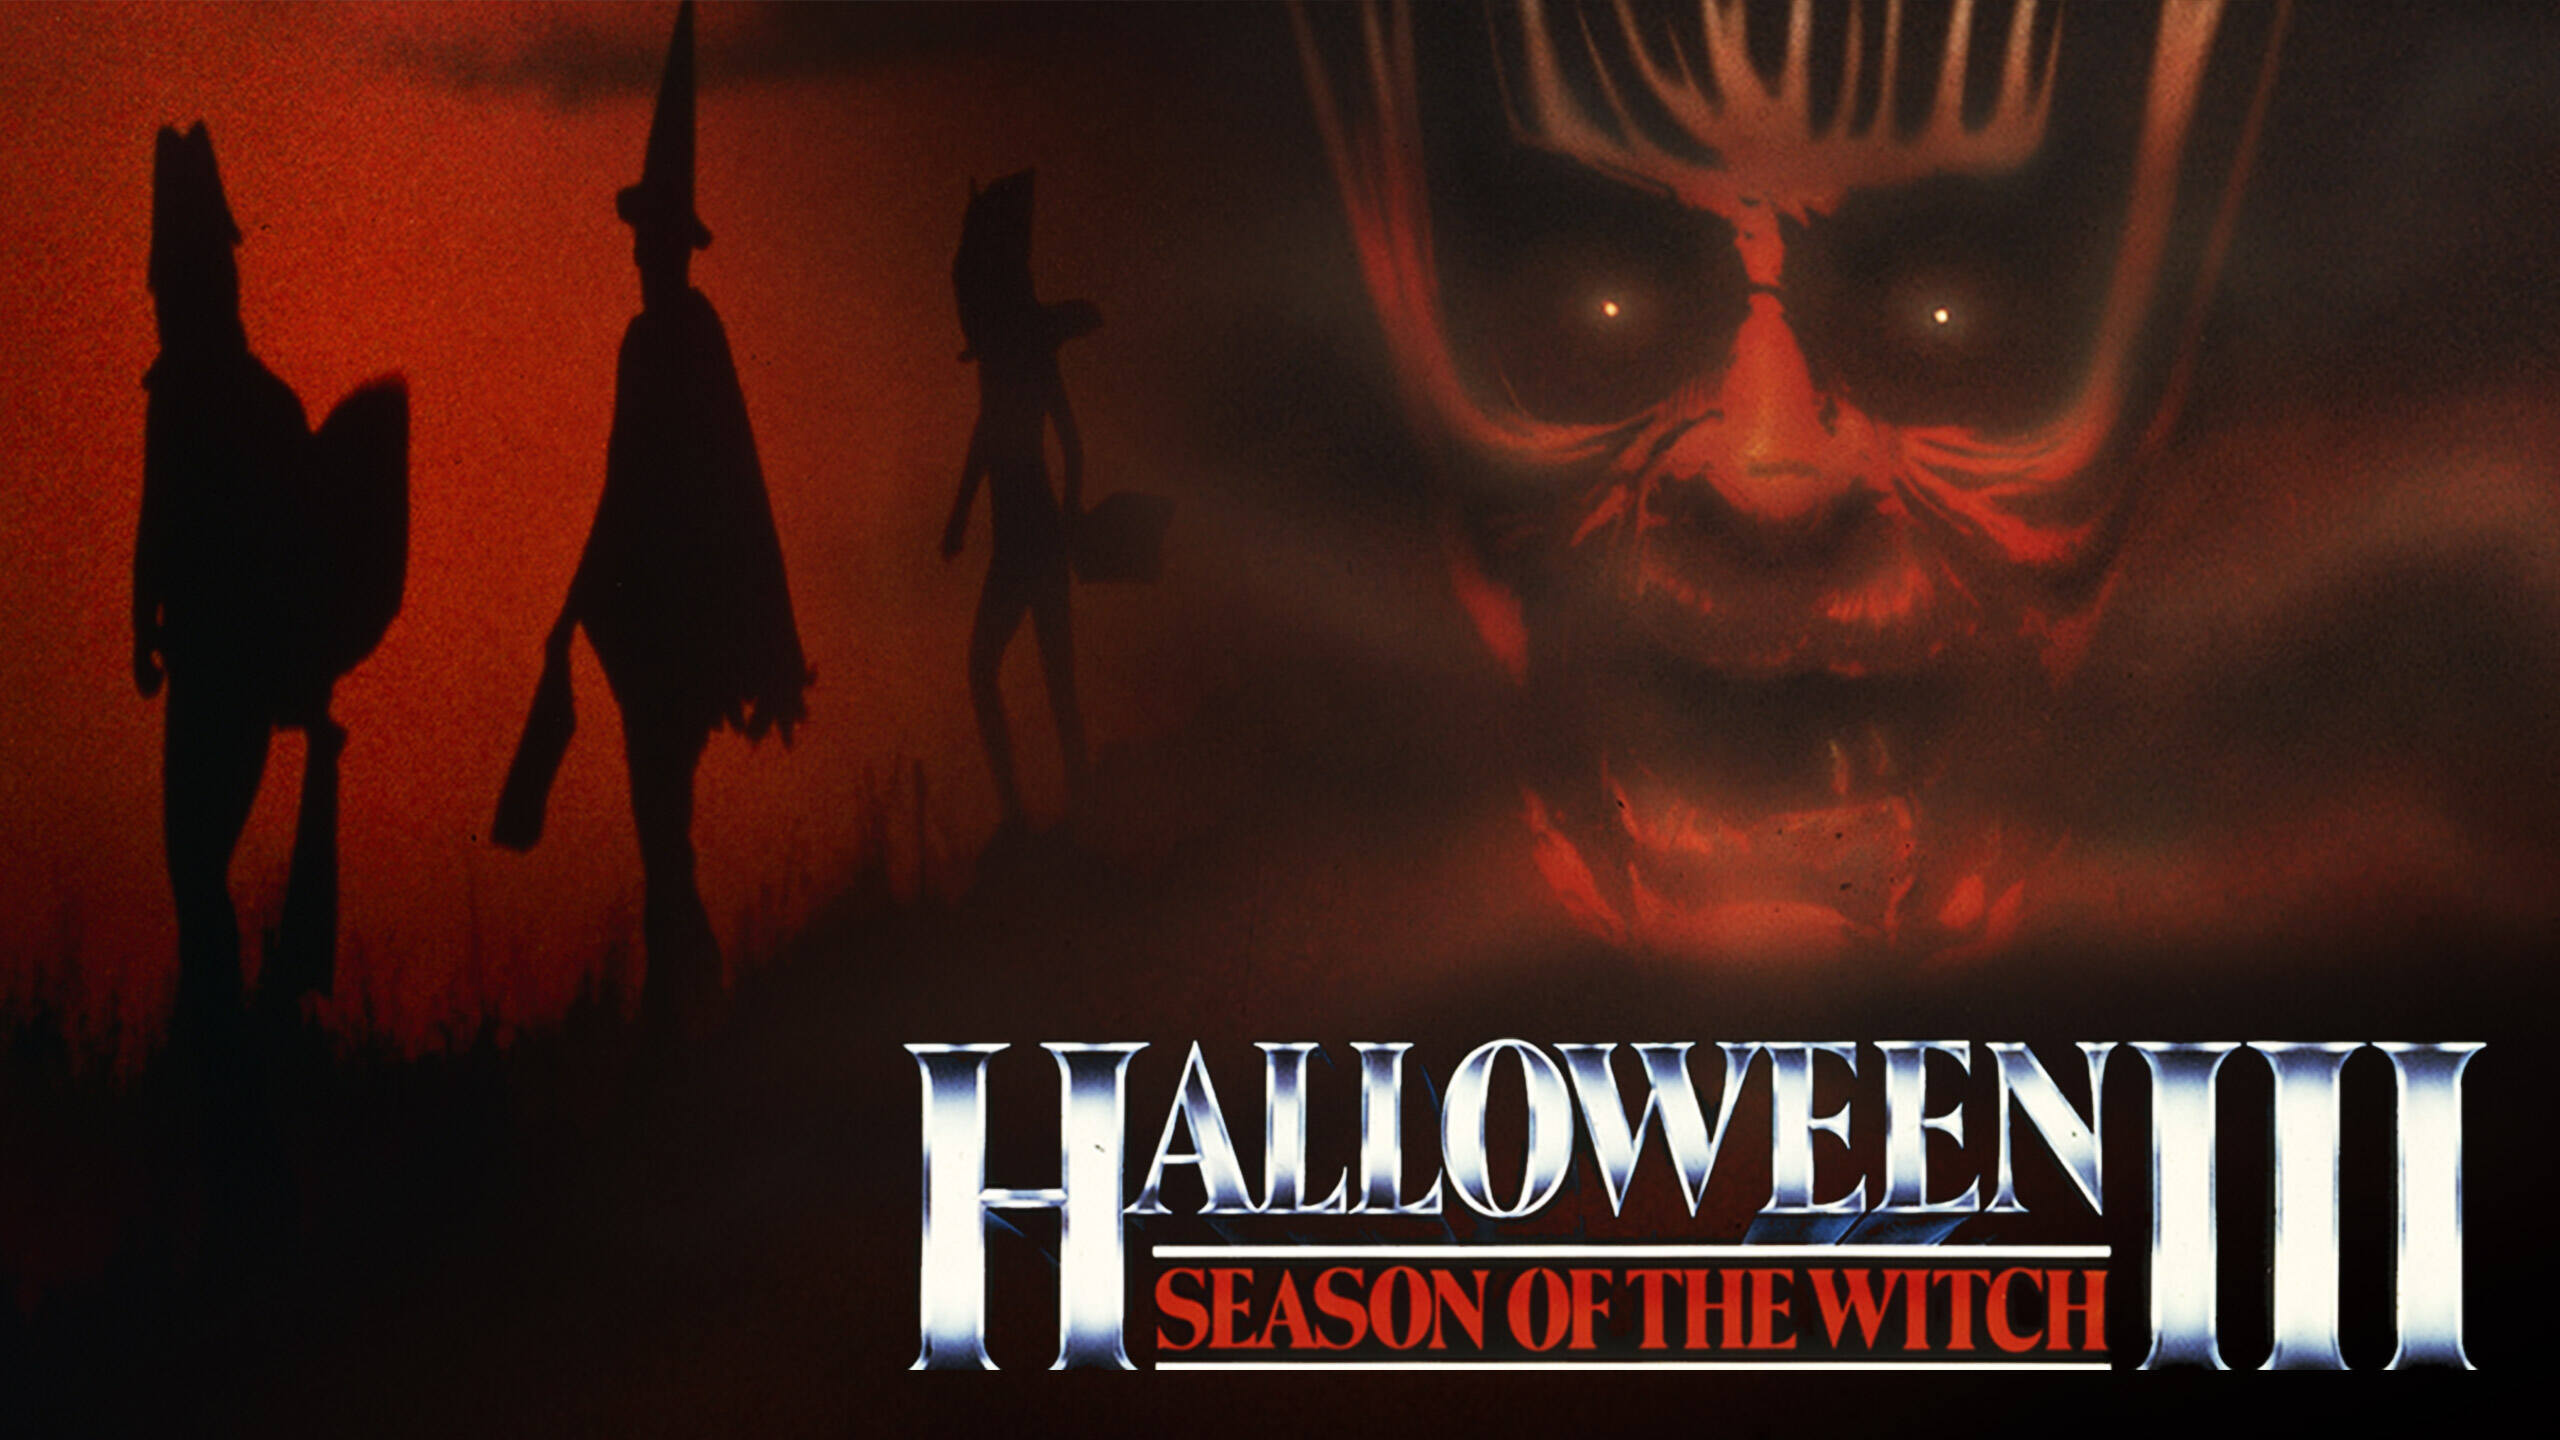 33-facts-about-the-movie-halloween-iii-season-of-the-witch